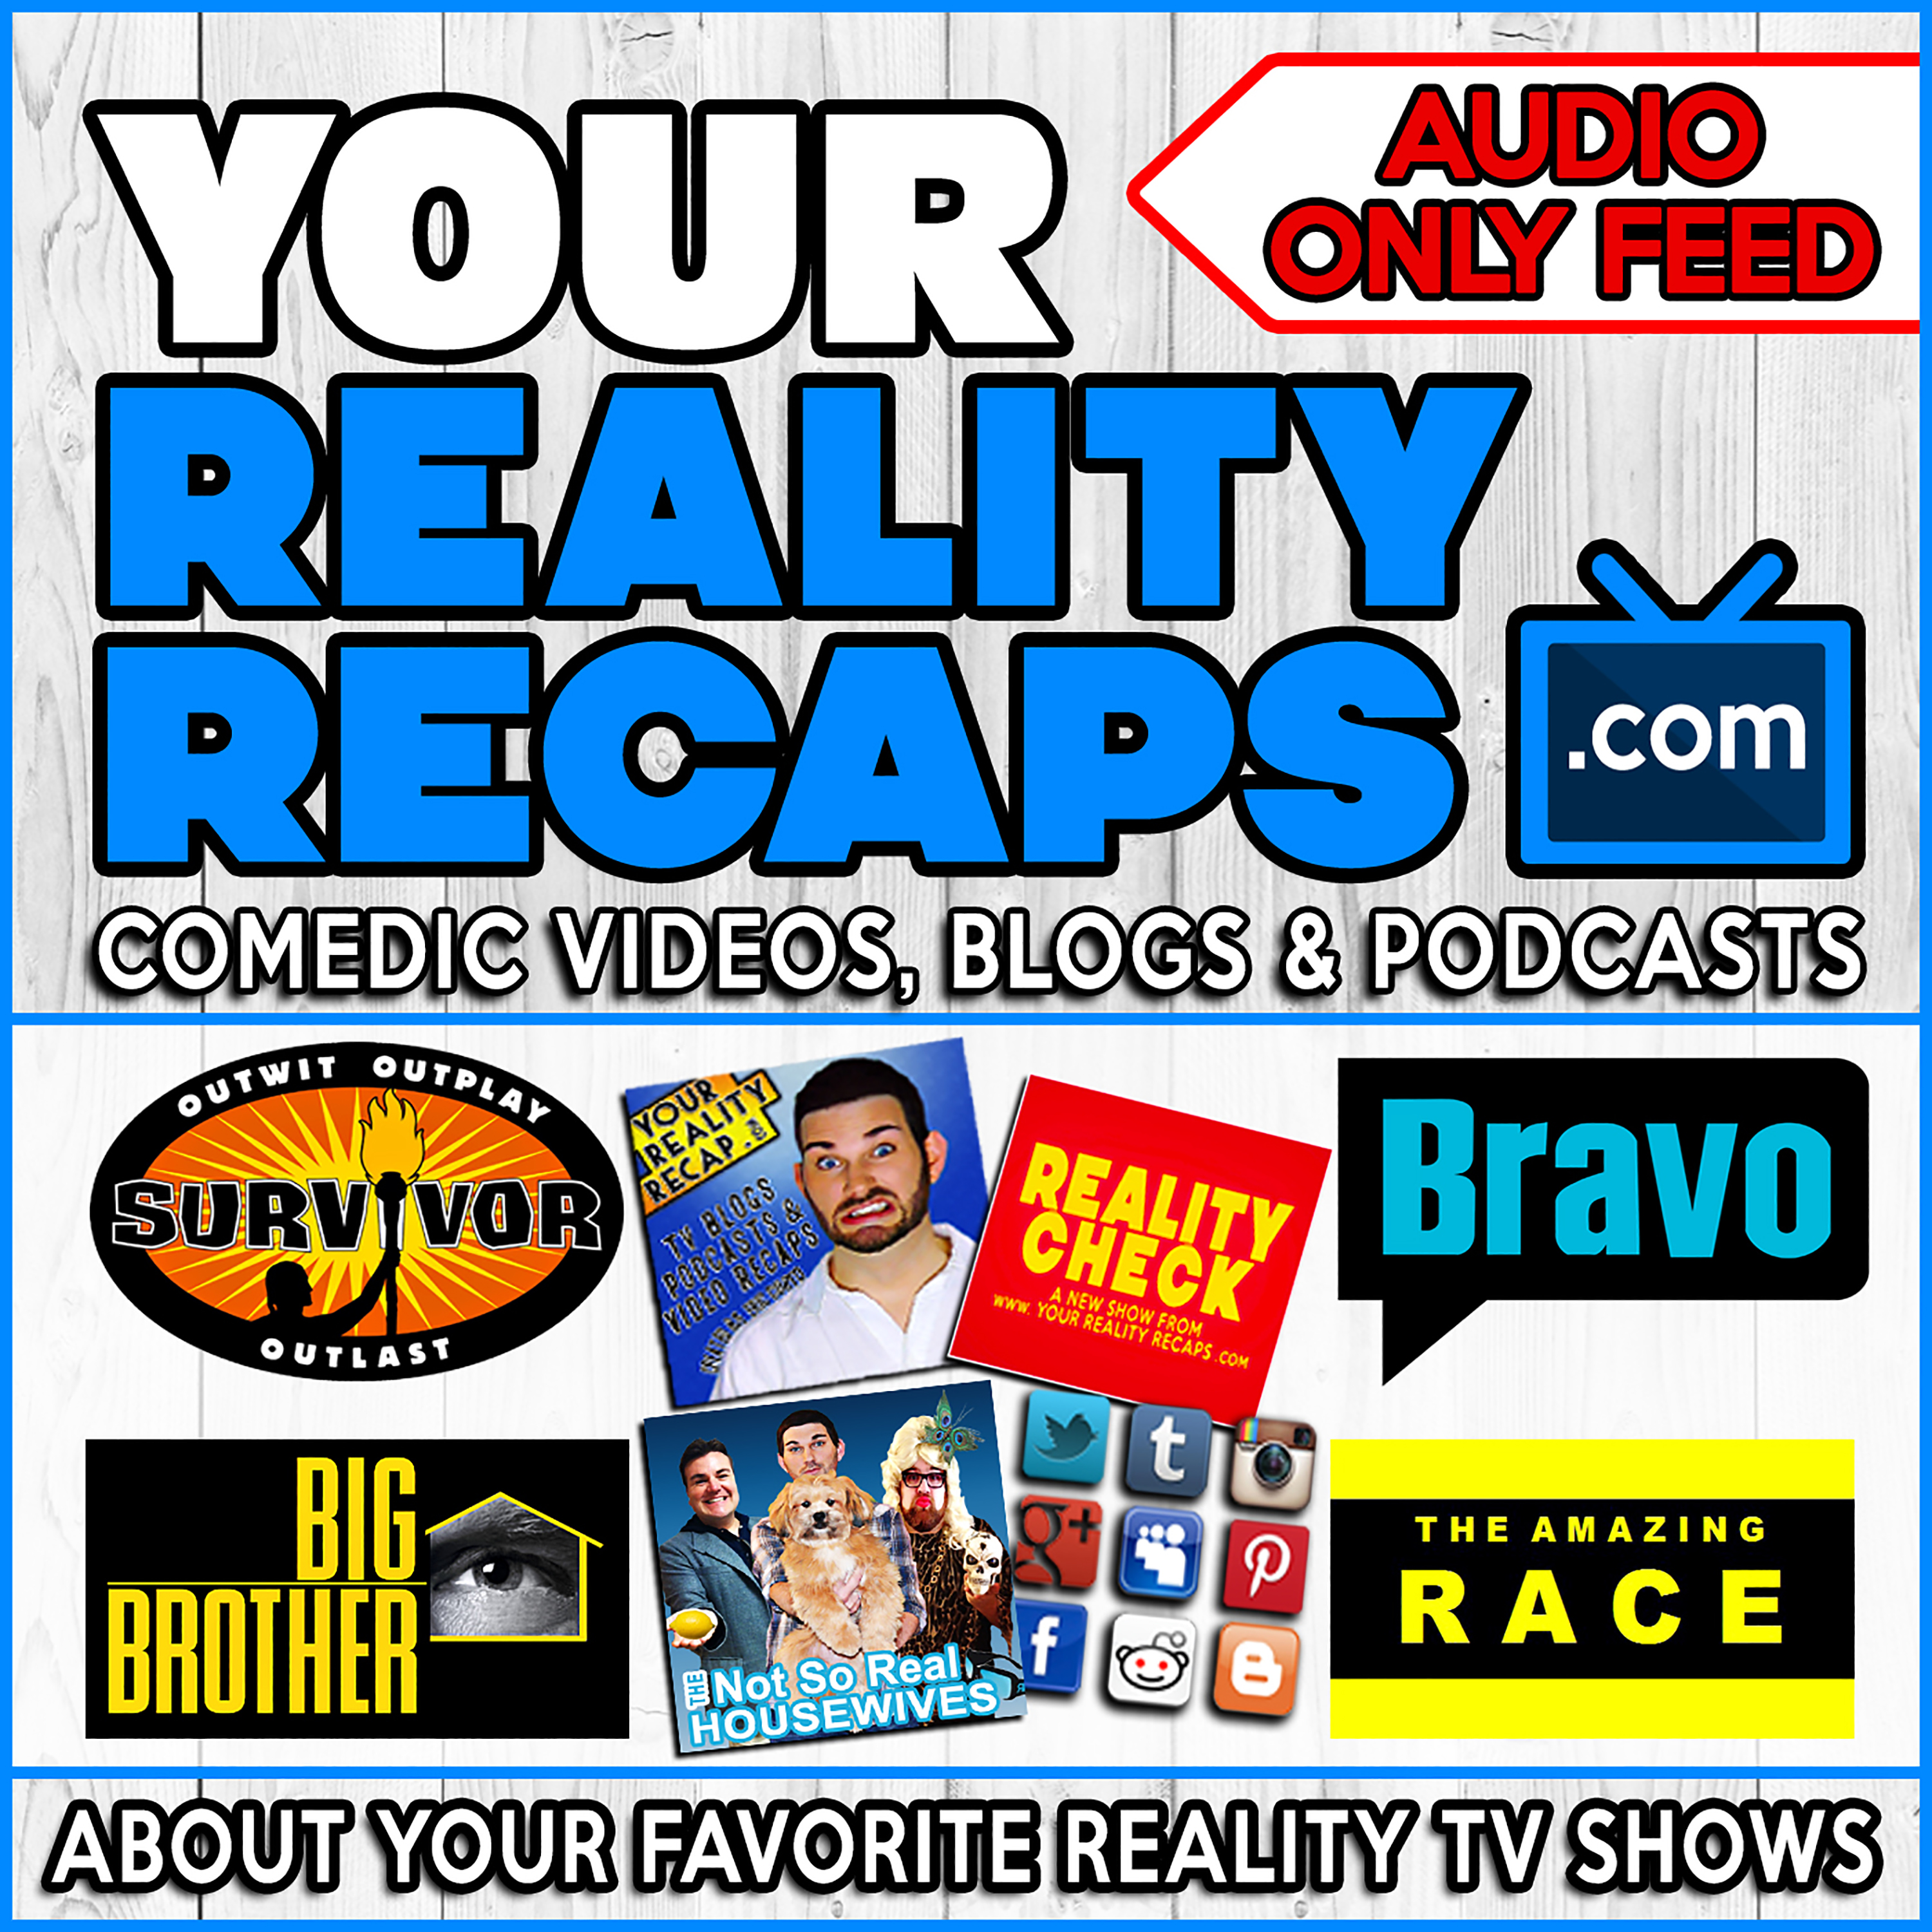 Your Reality Recaps: ALL SHOWS PODCAST FEED